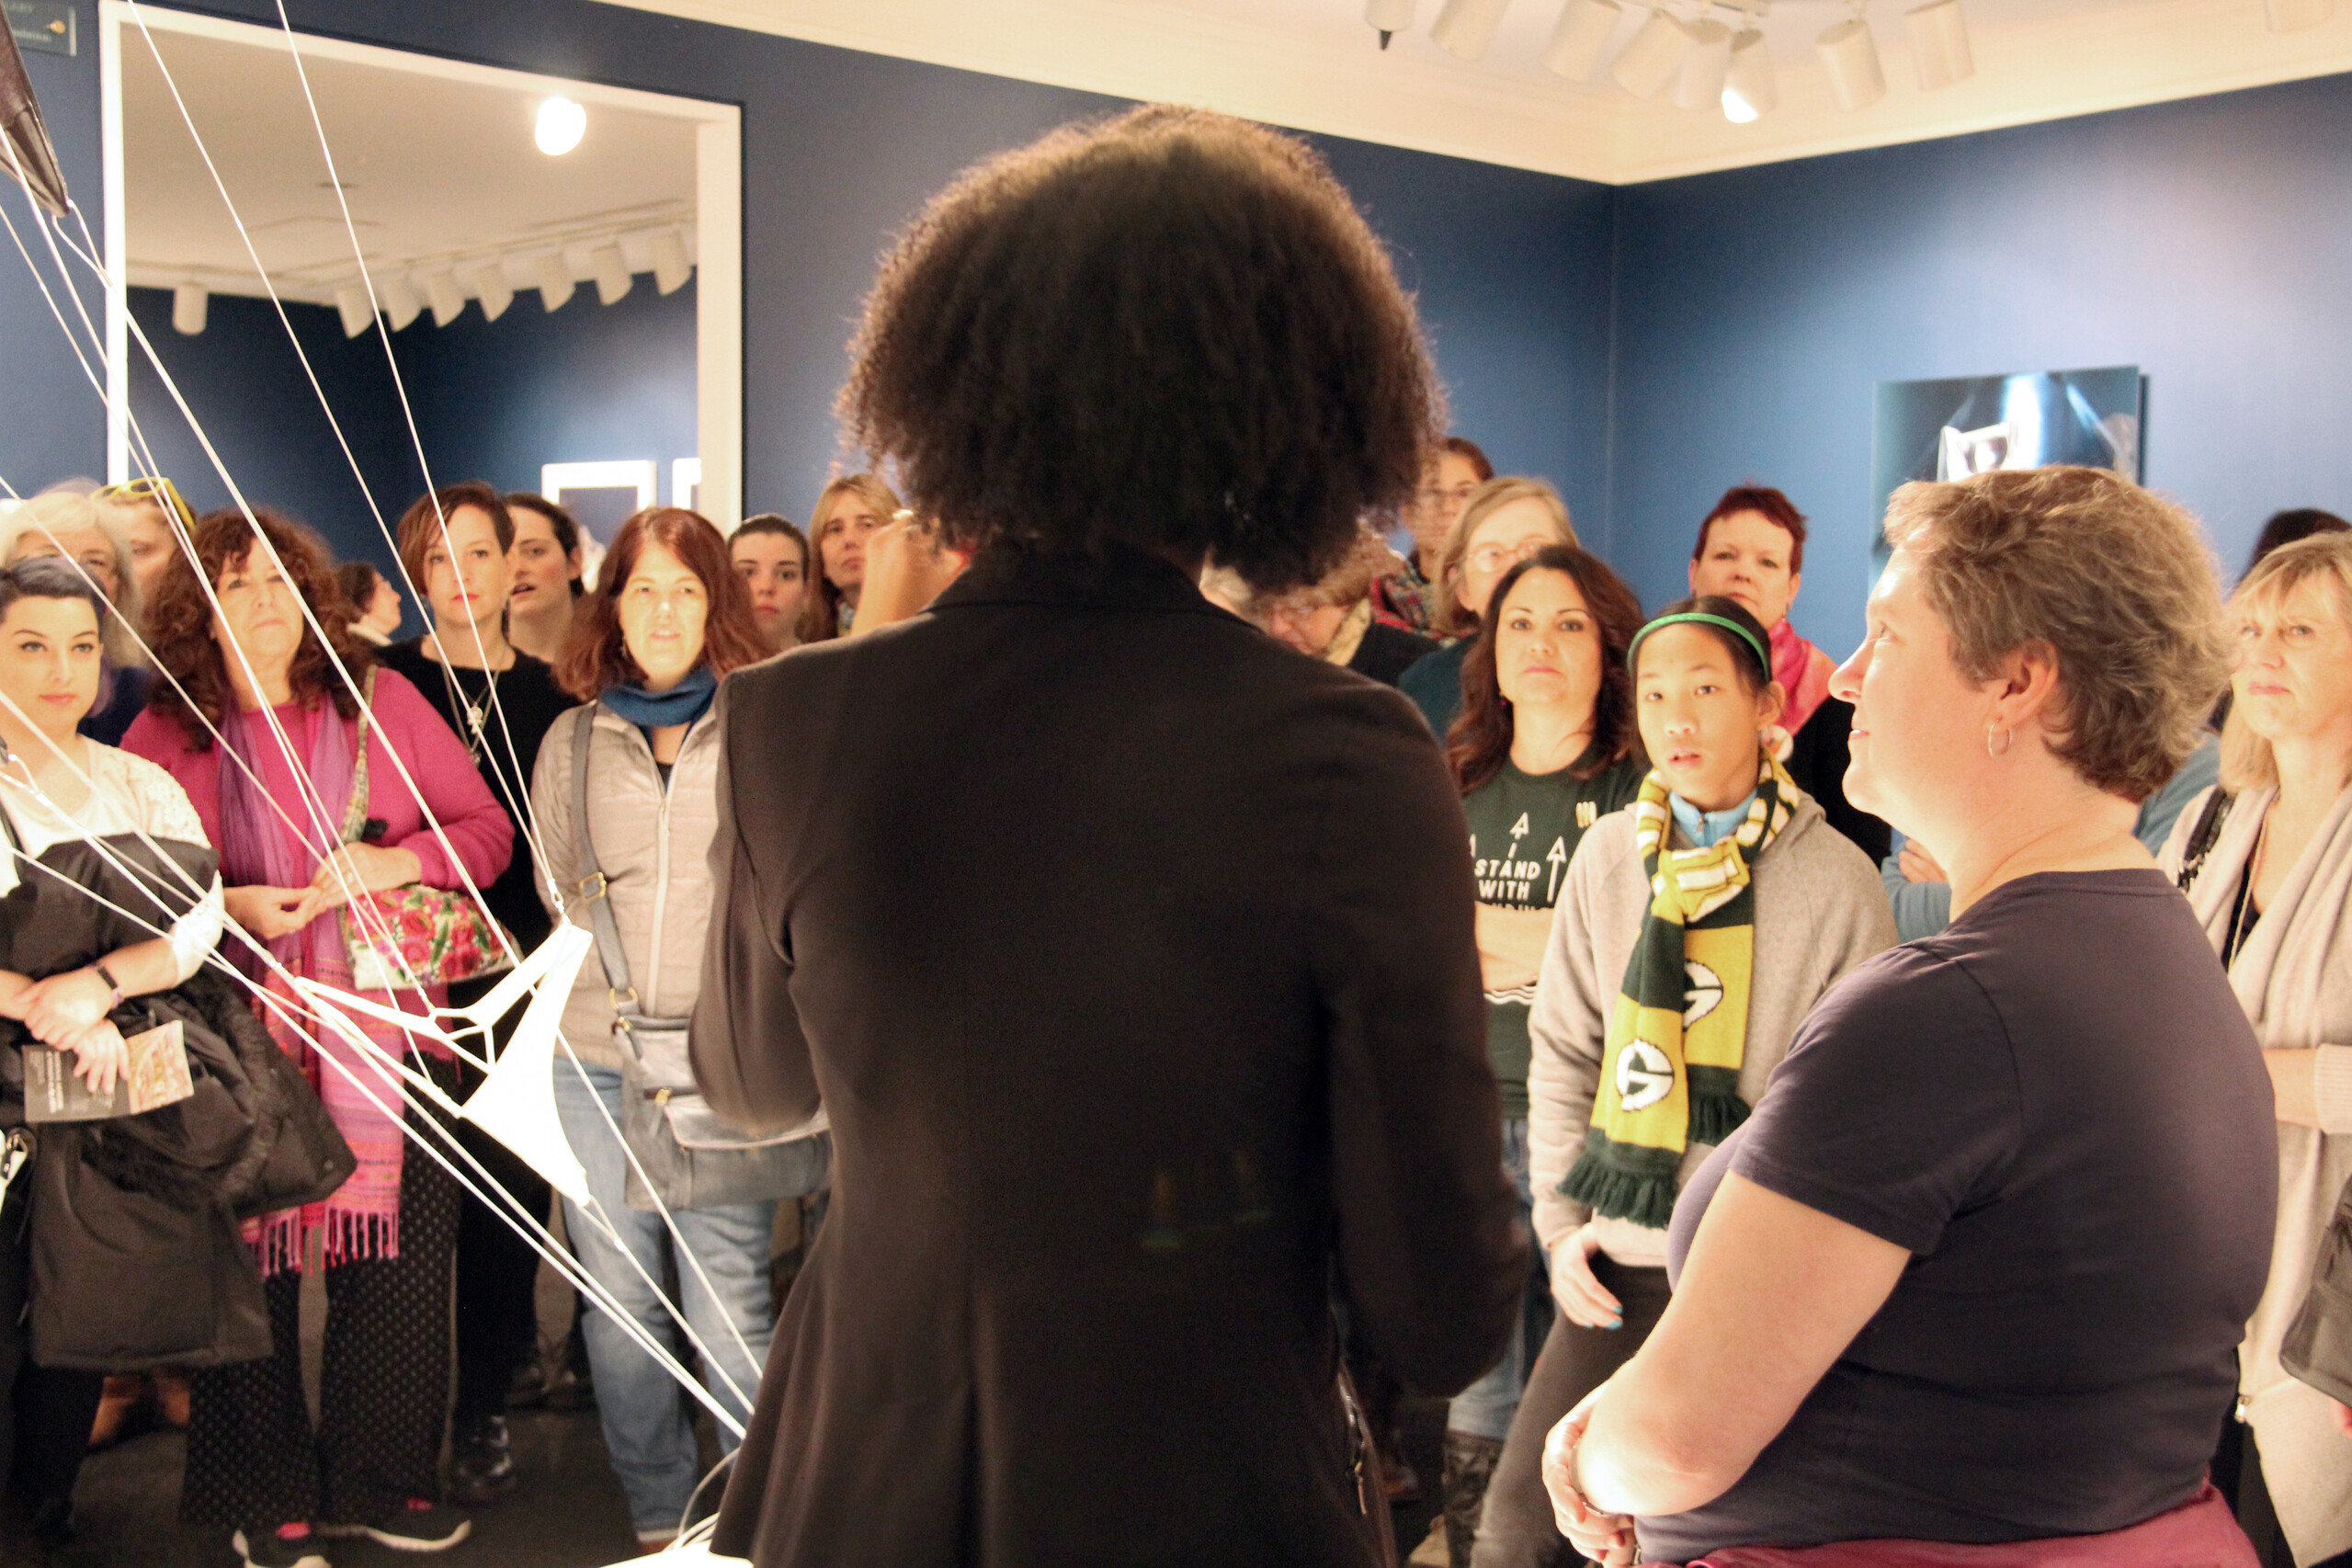 NMWA educator with dark curly hair and a black blazer stands in the foreground with her back to camera as she speaks to a large crowd of visitors about a sculpture composed of hanging strings and fabric in the galleries.